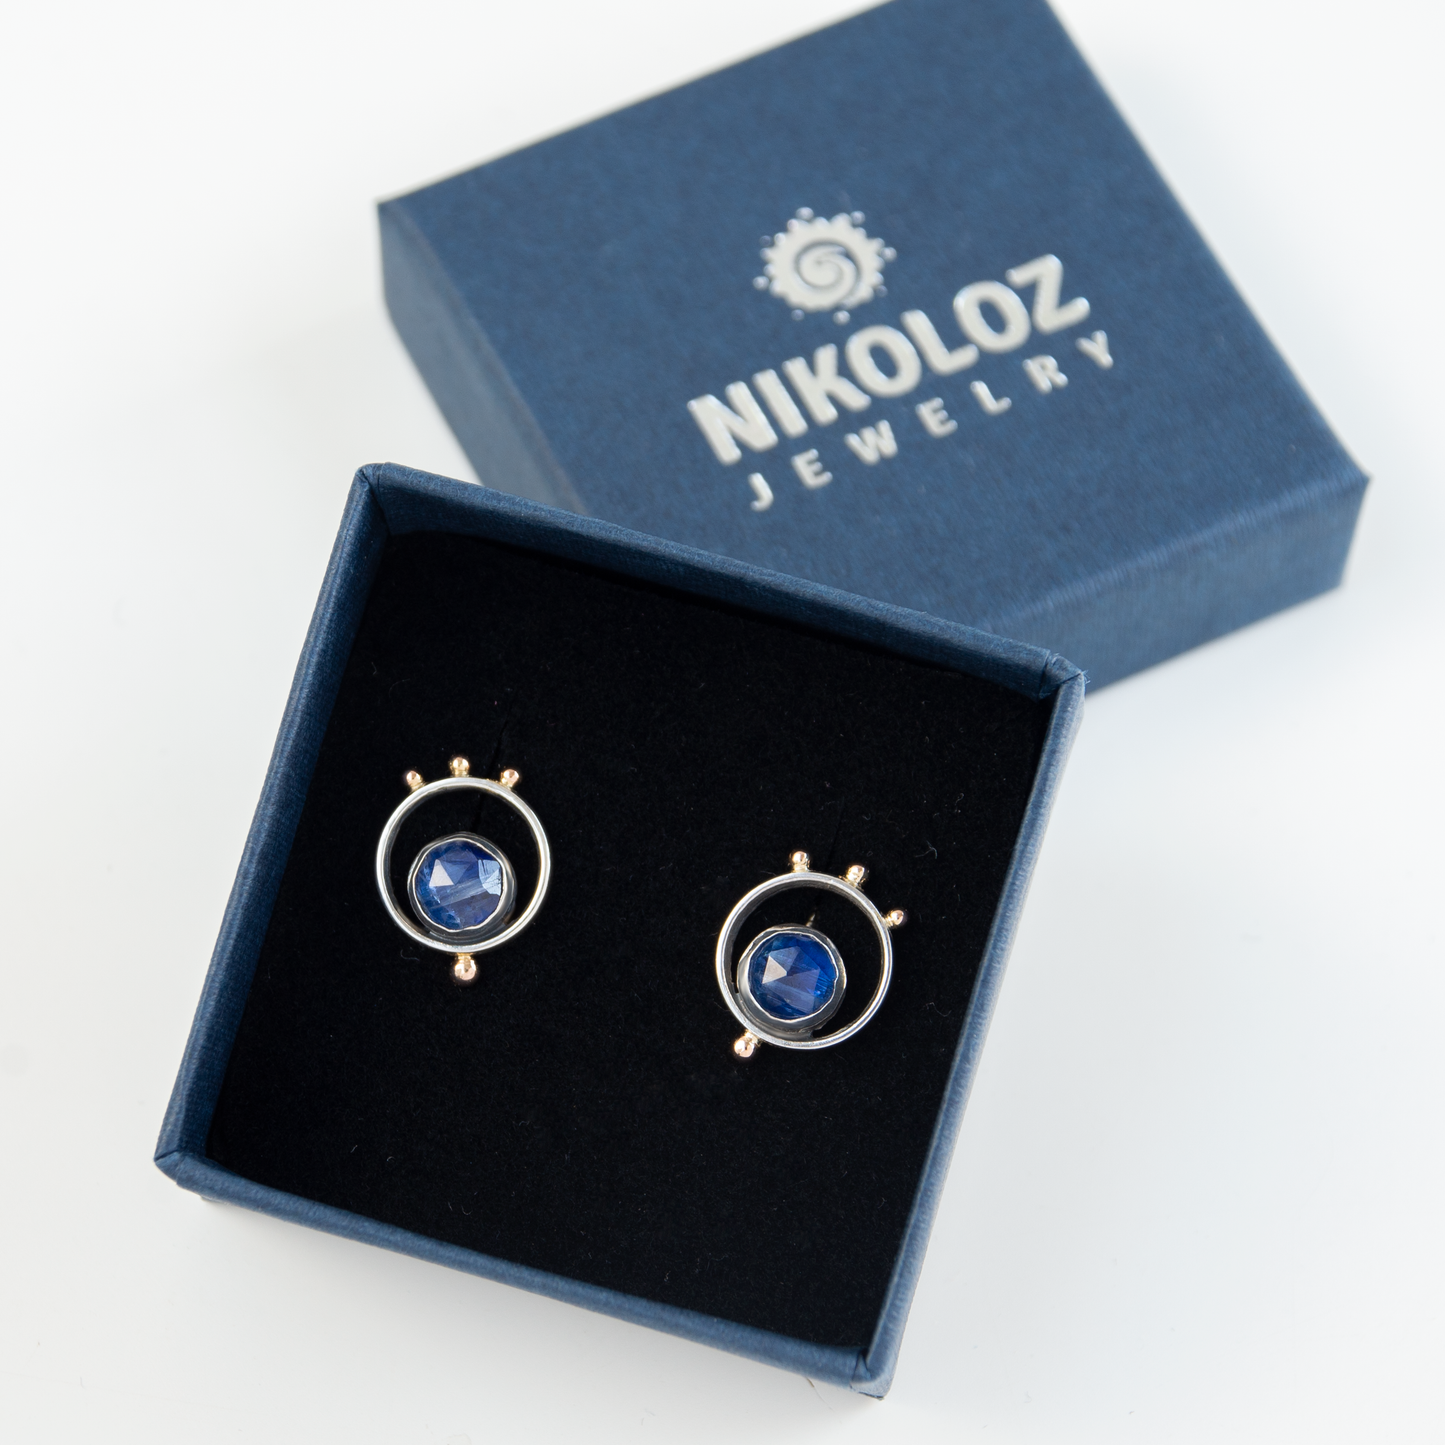 Minimalistic Silver Earrings with 14K Gold beads and Blue Kyanite stones